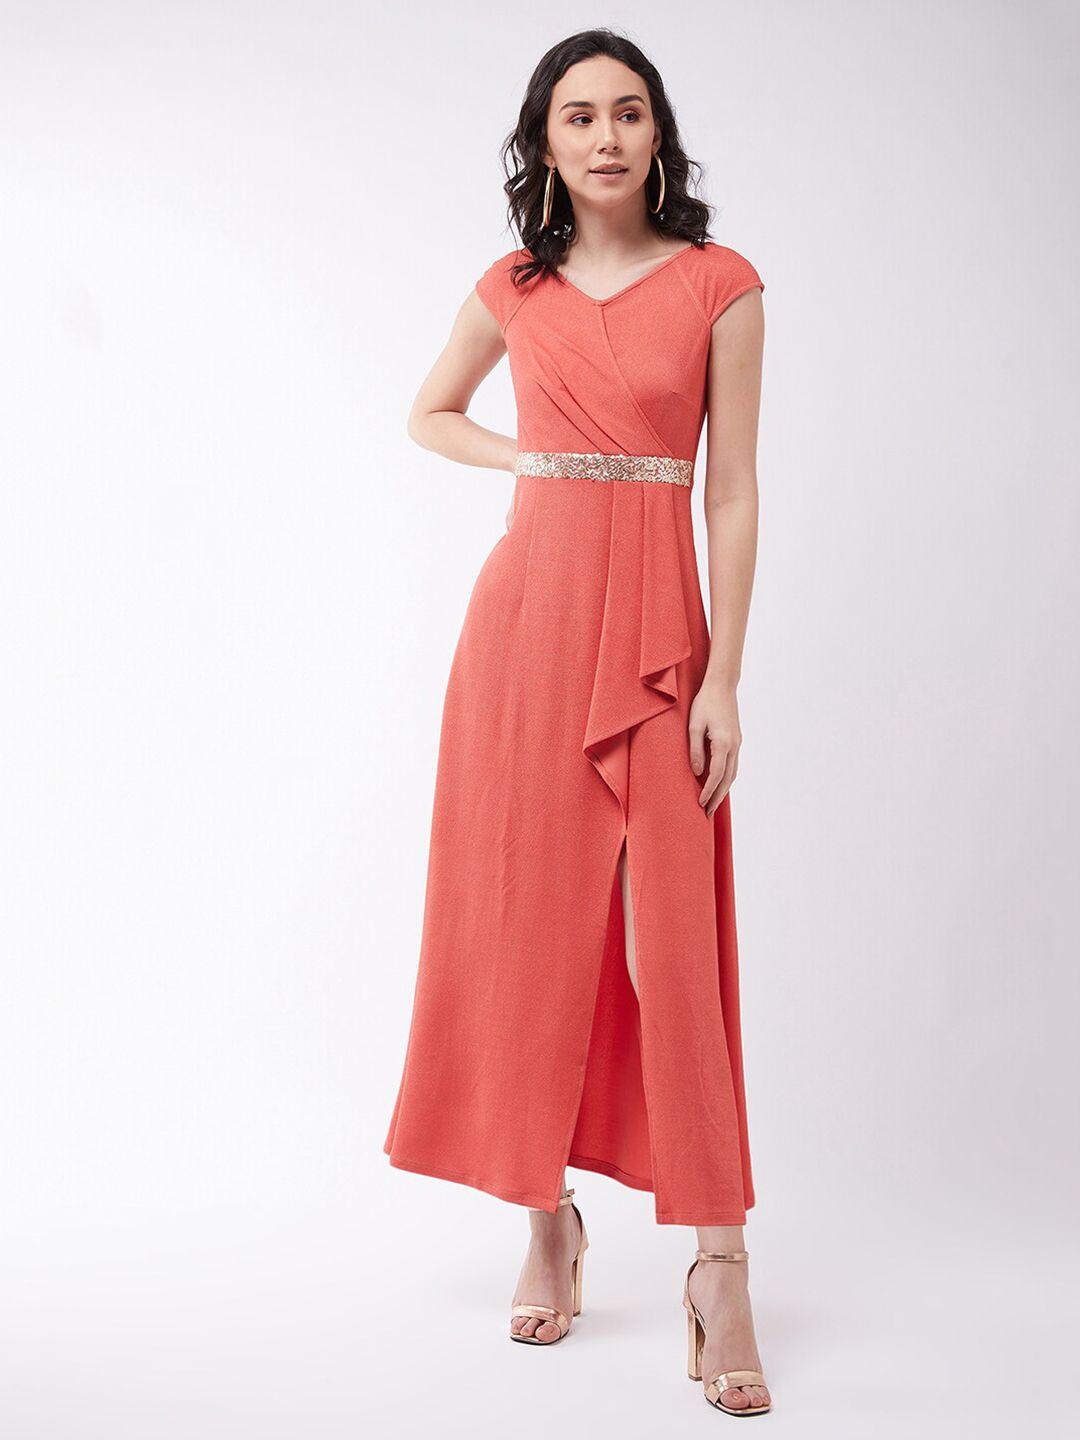 miss-chase-coral-orange-sequined-maxi-dress